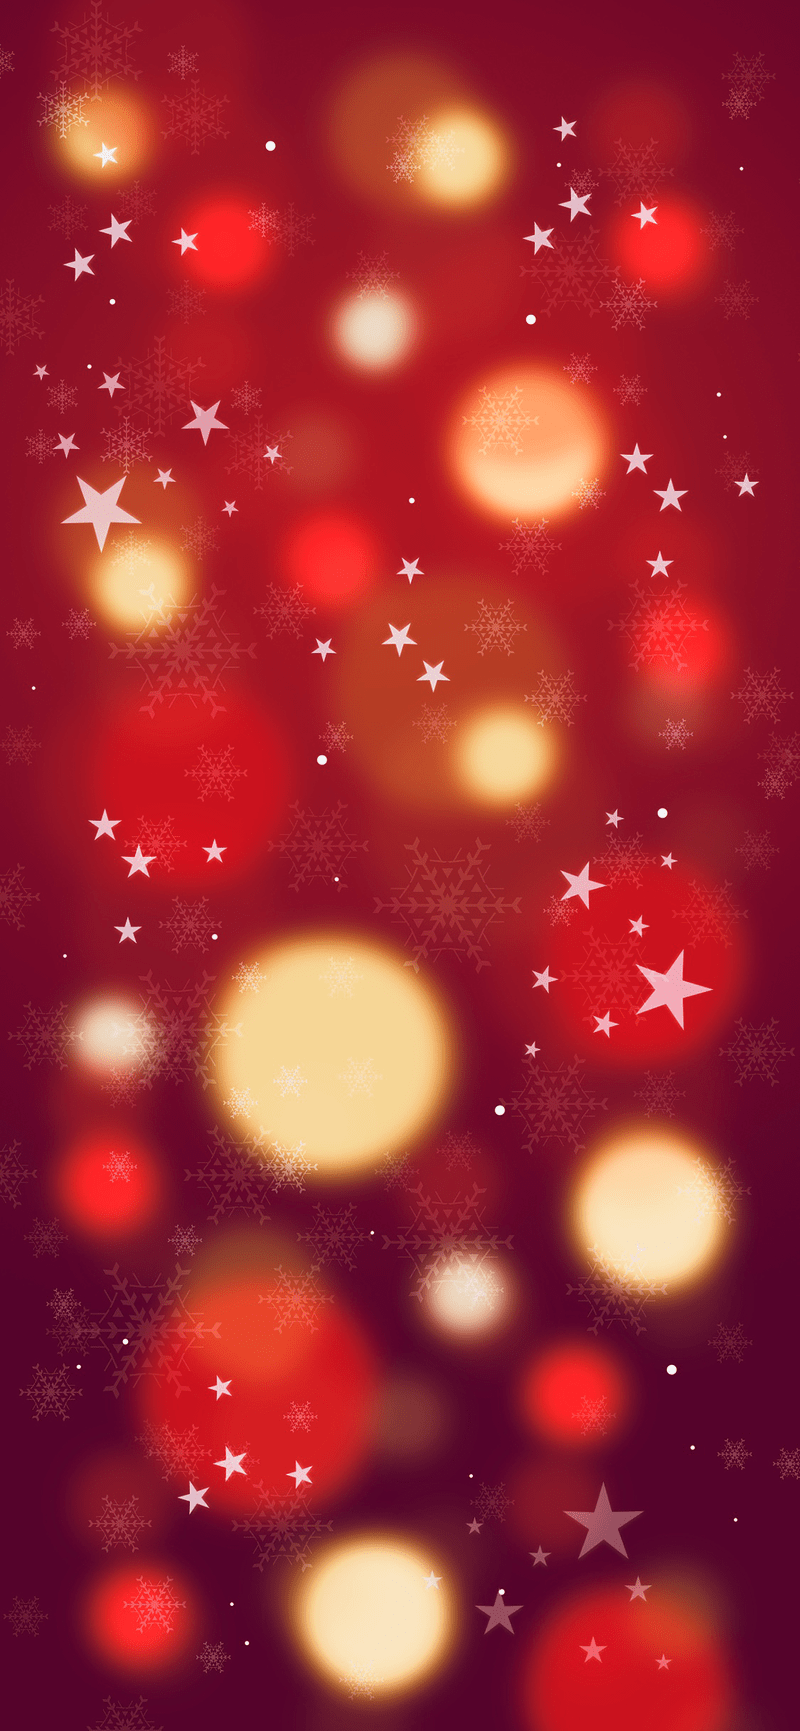 iphone xs max christmas wallpapers